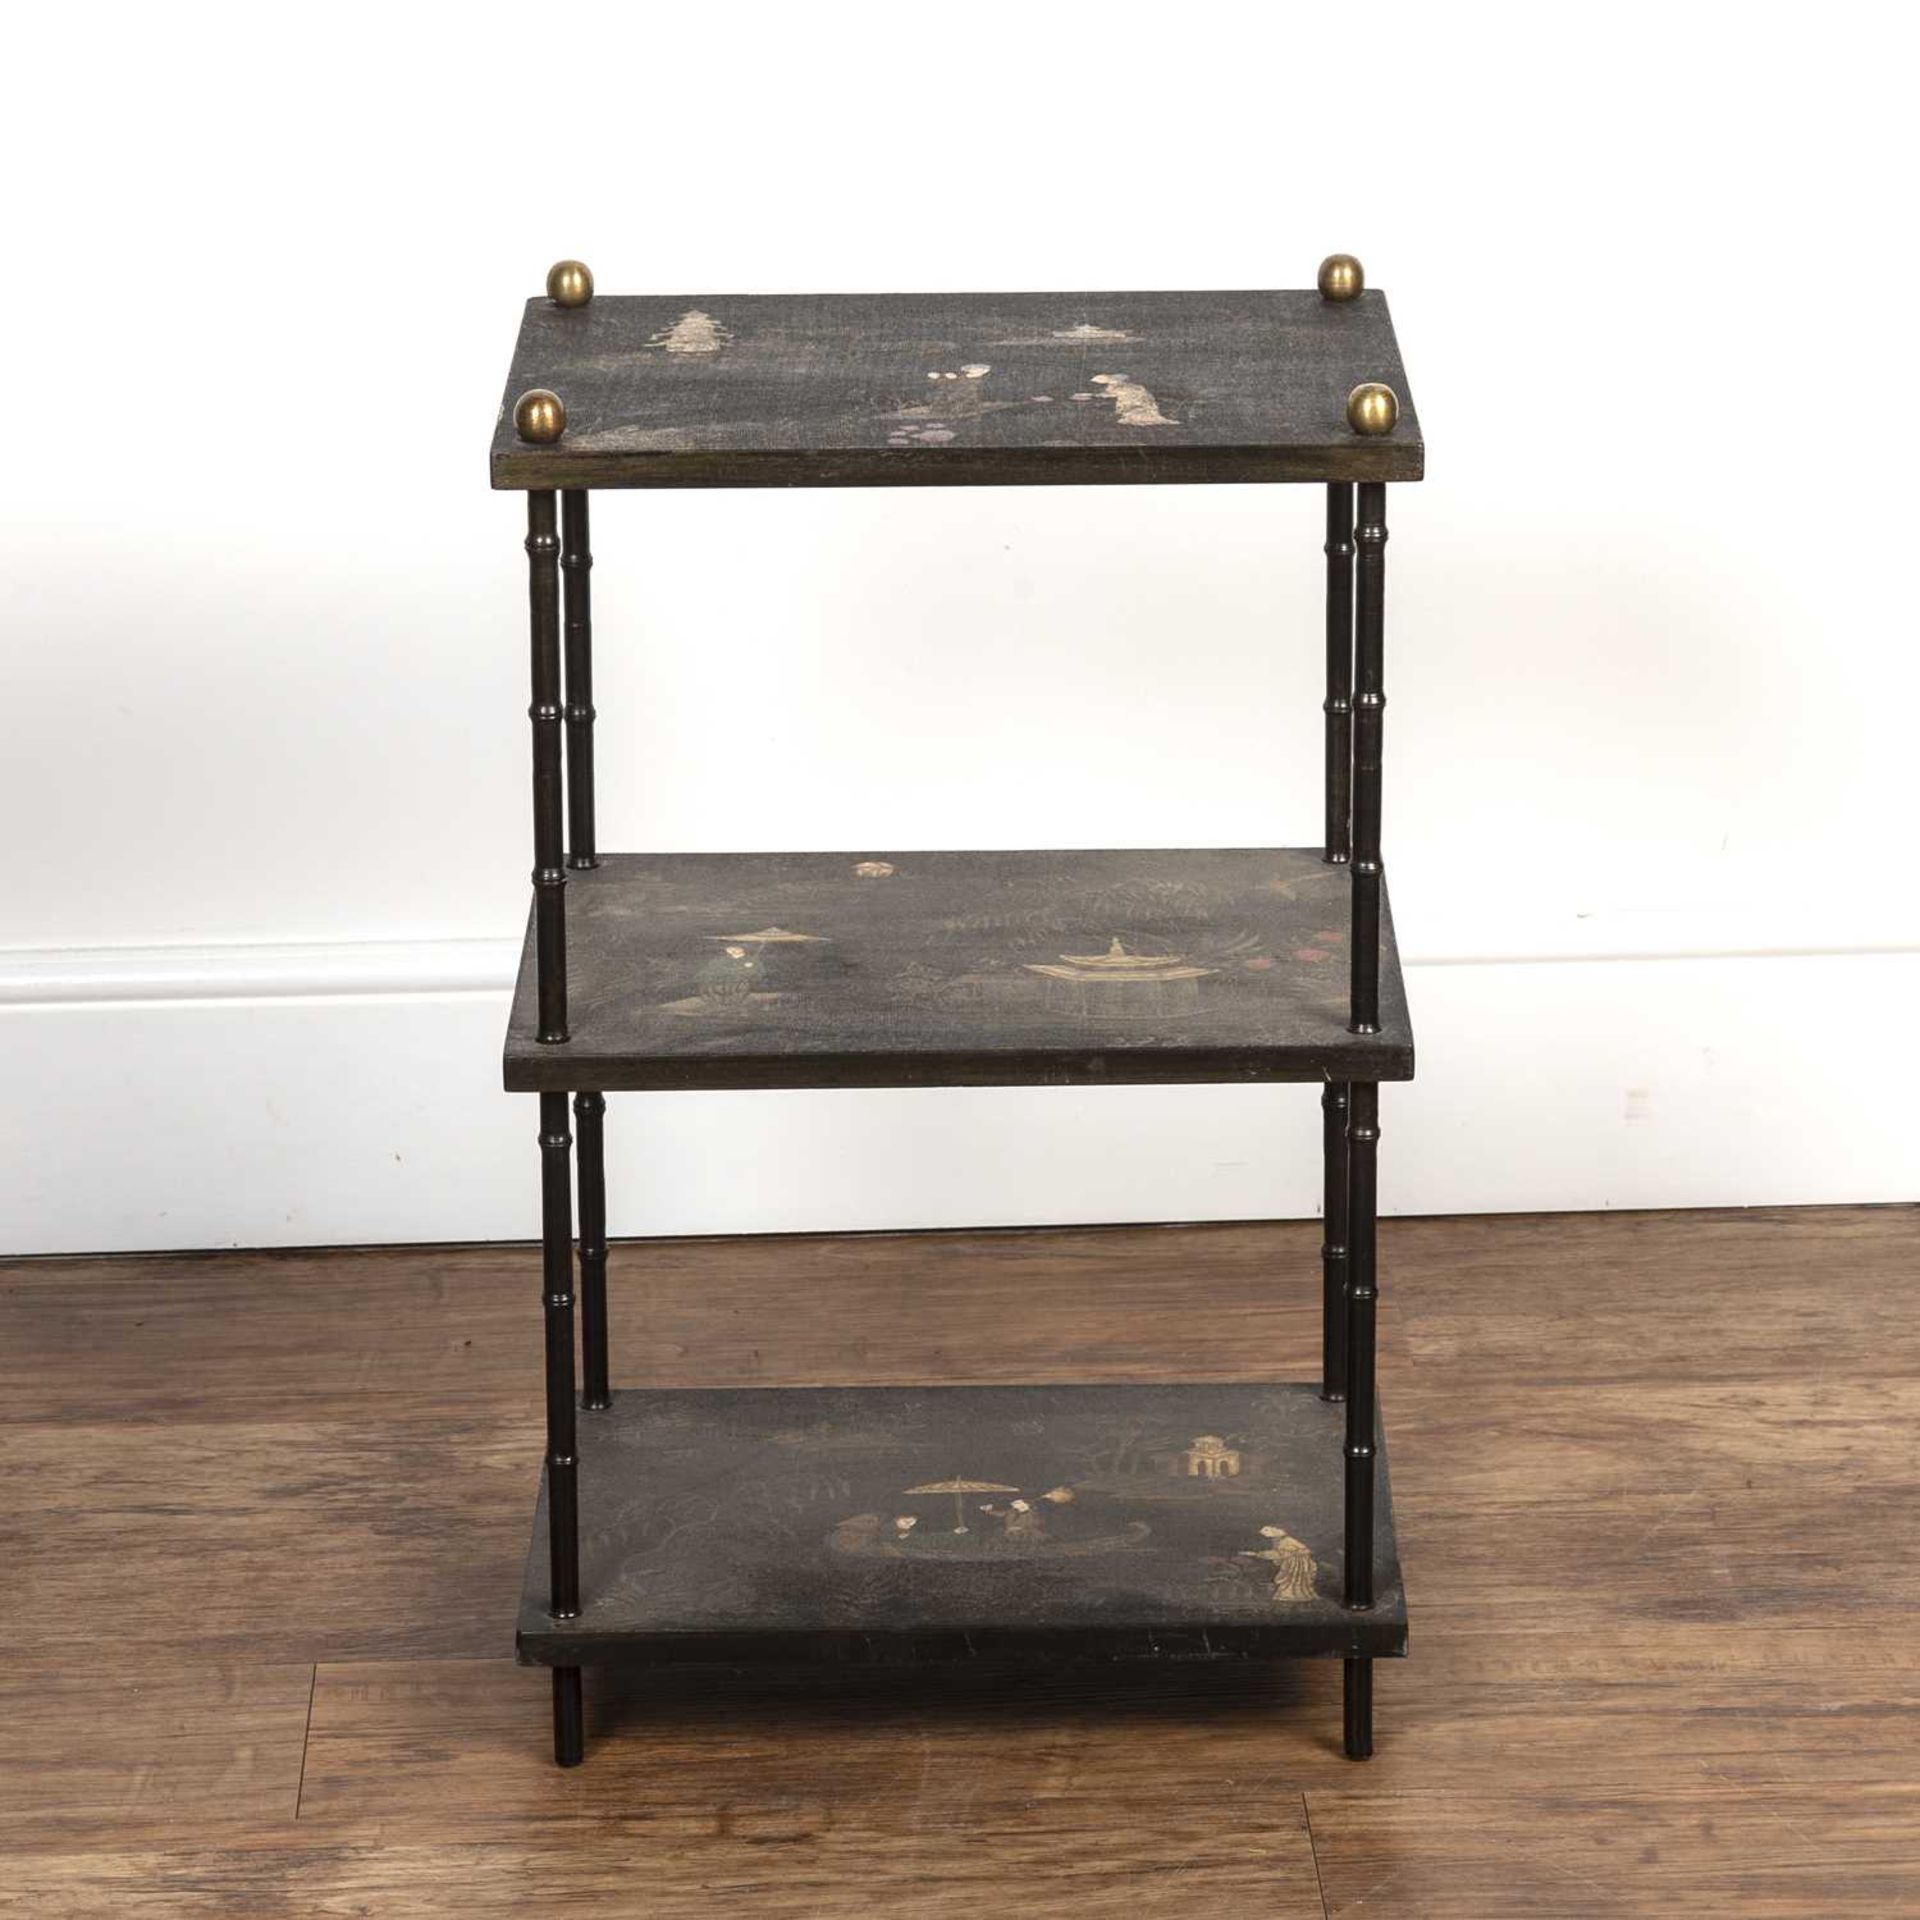 Chinoiserie three tier stand with painted decoration on faux bamboo metal supports, 40.5cm wide x - Image 2 of 4